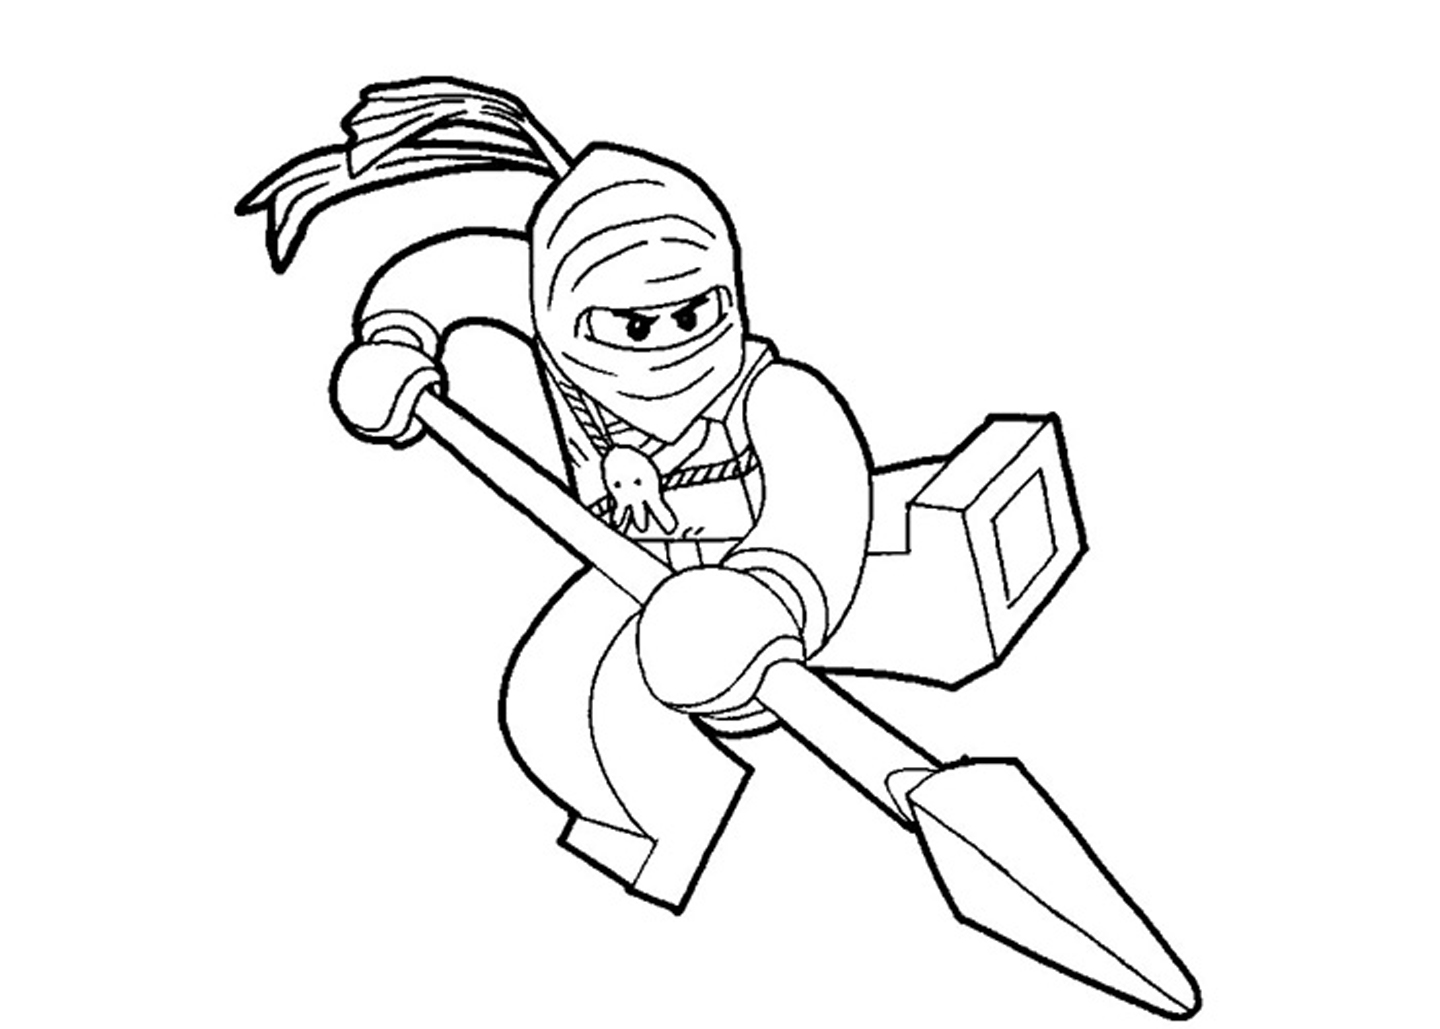 free coloring pages for kids free coloring pages for kids